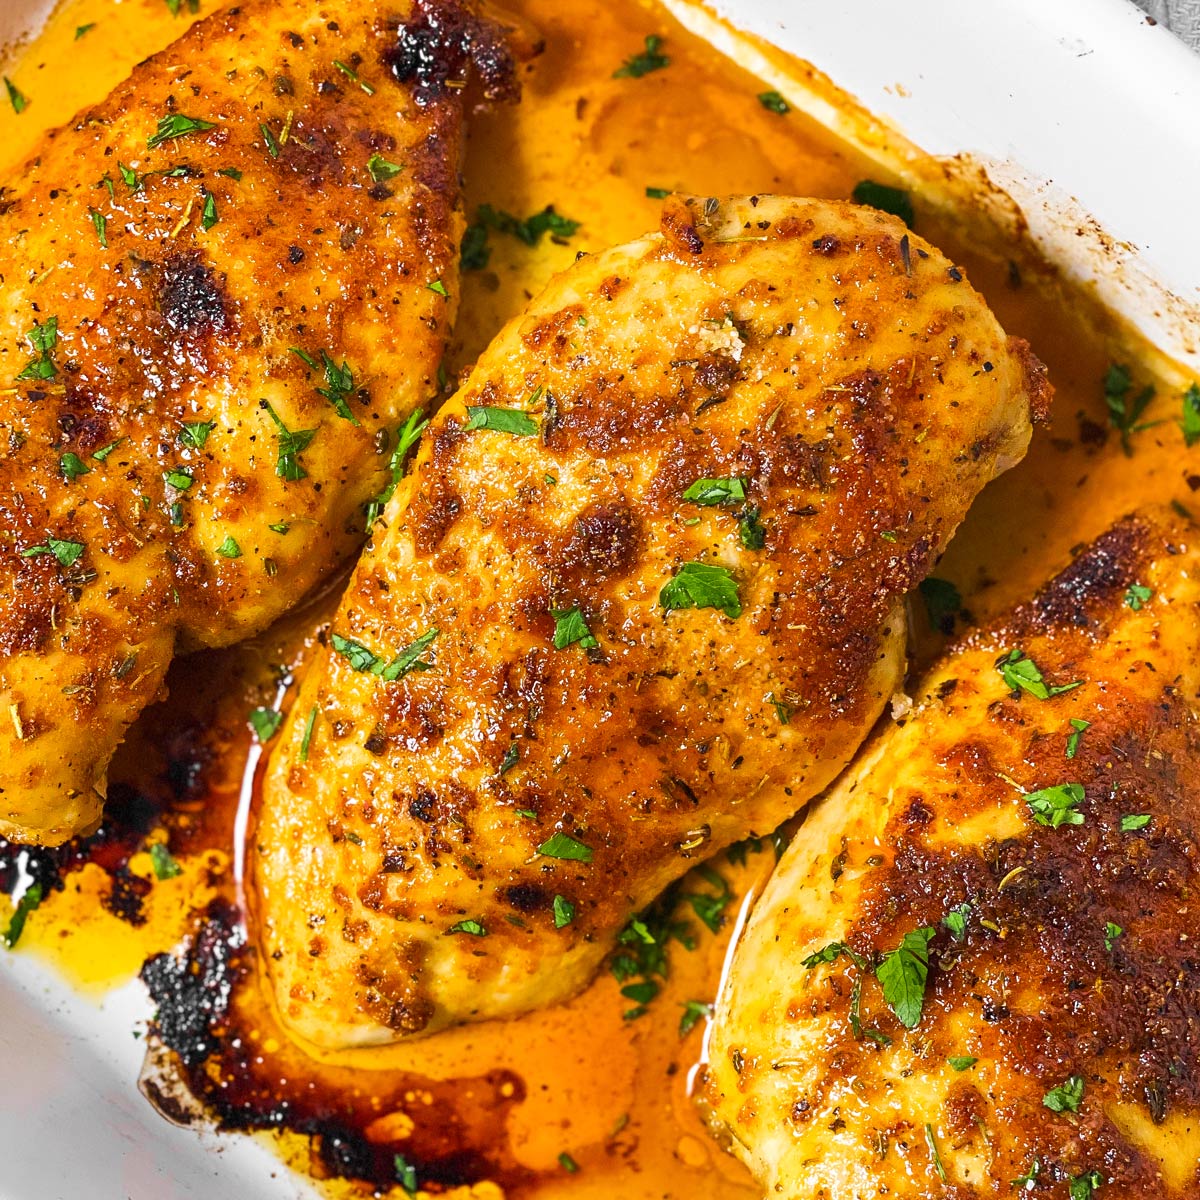 https://www.savorynothings.com/wp-content/uploads/2022/01/baked-chicken-breast-recipe-image-sq.jpg